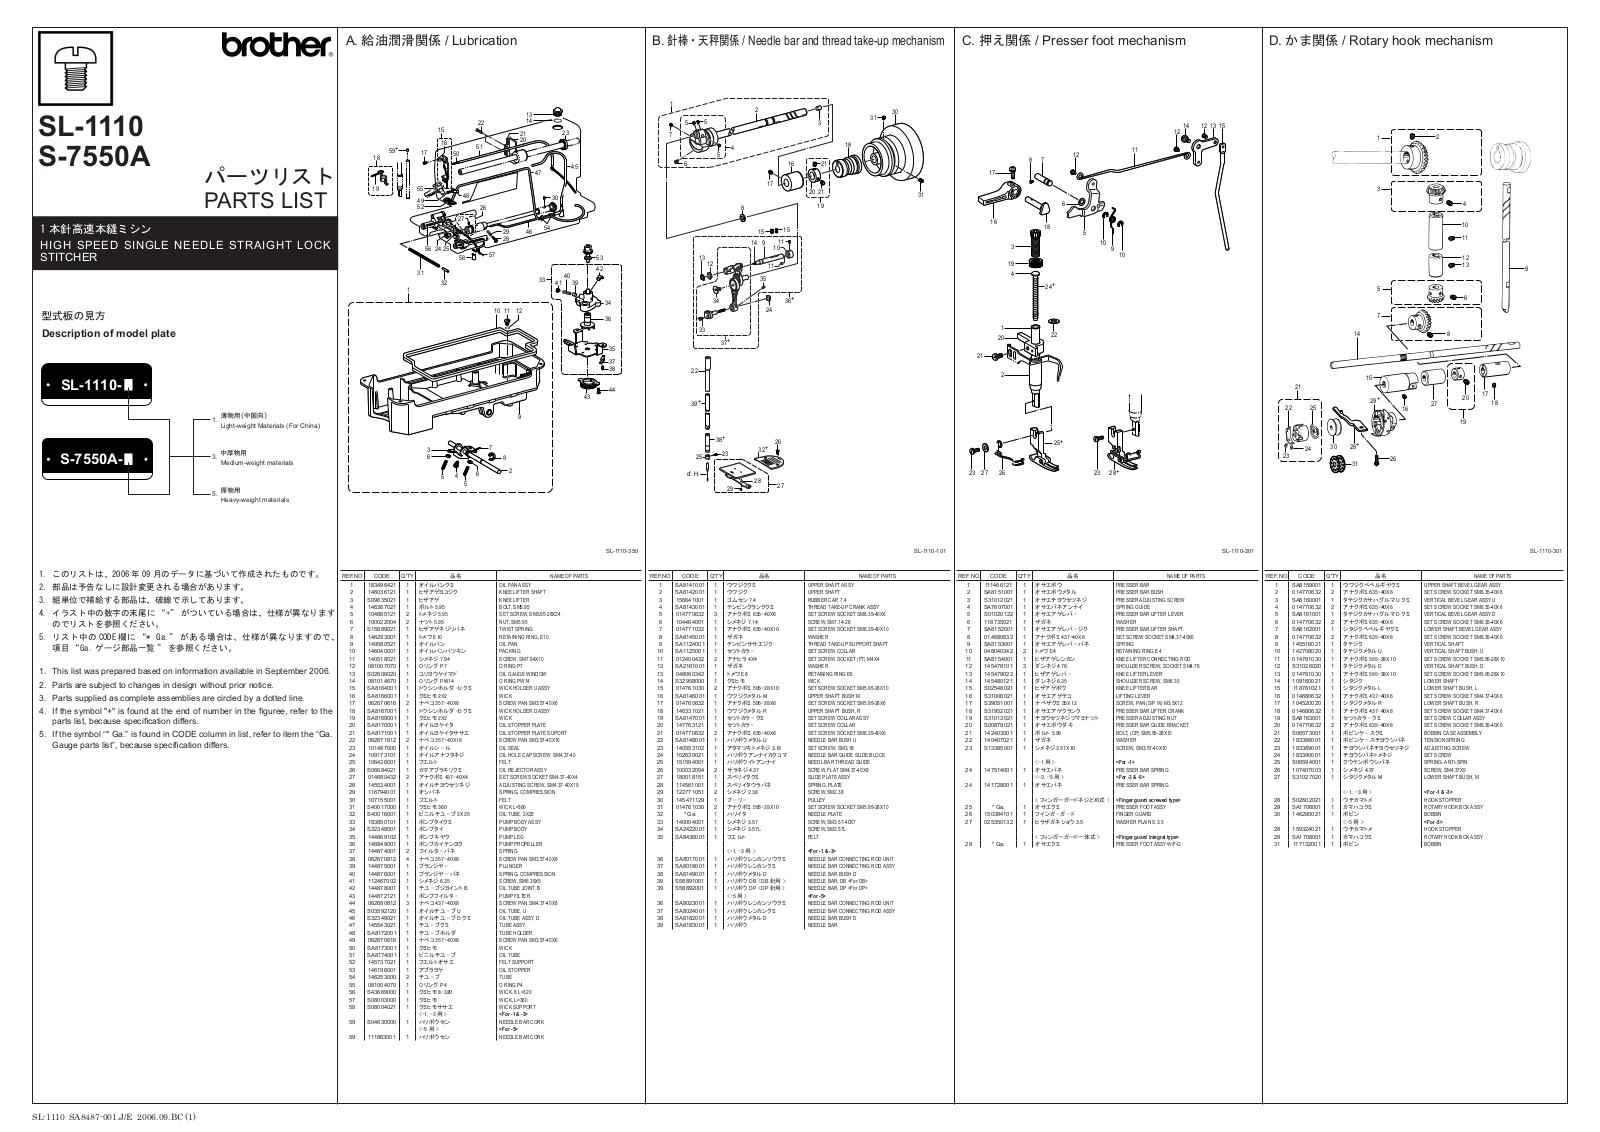 BROTHER SL-1110, S-7550A Parts List